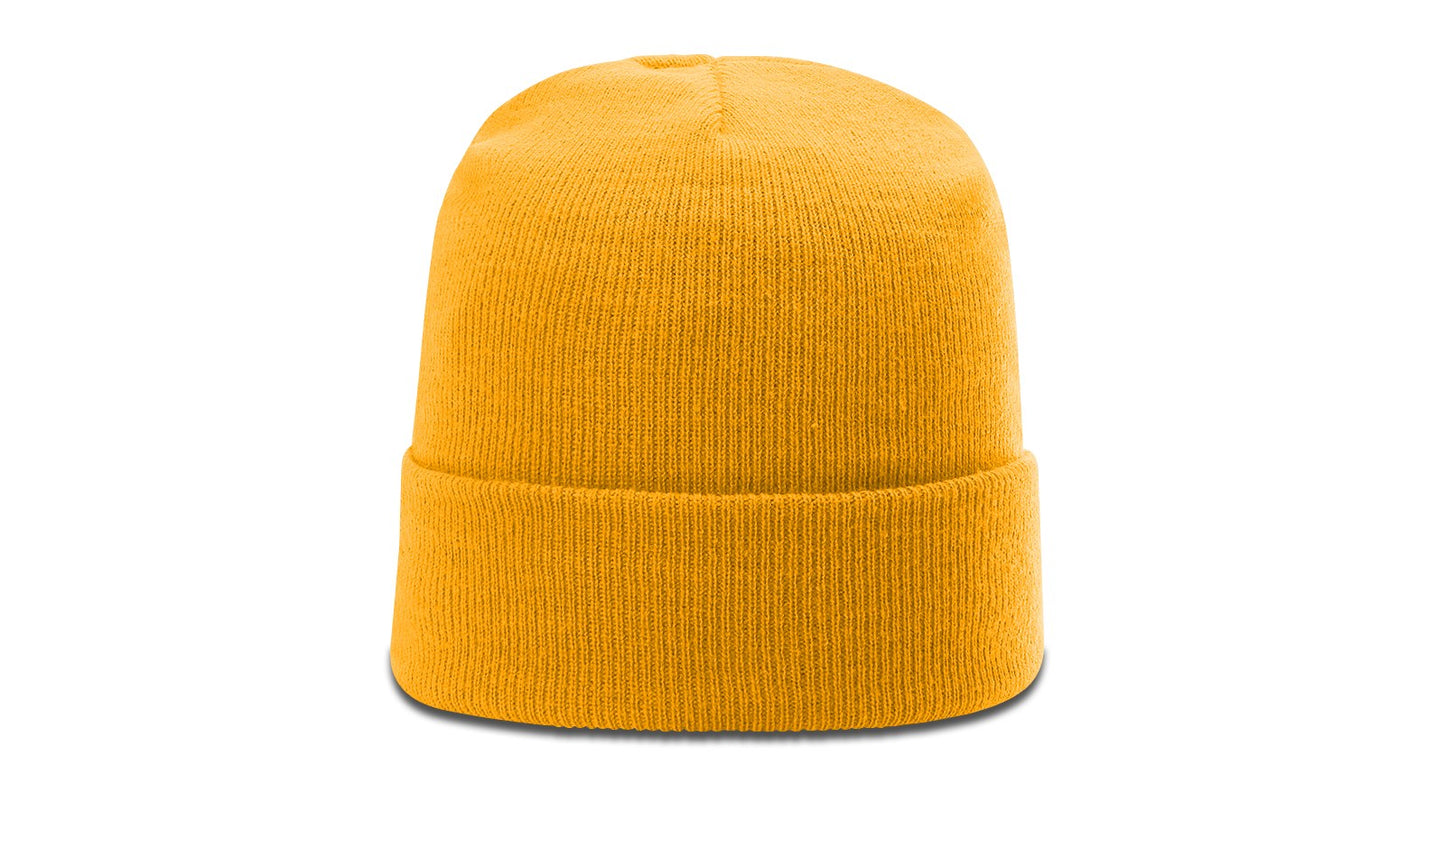 Richardson R18 Solid Beanie with Cuff Knit Cap - Blank